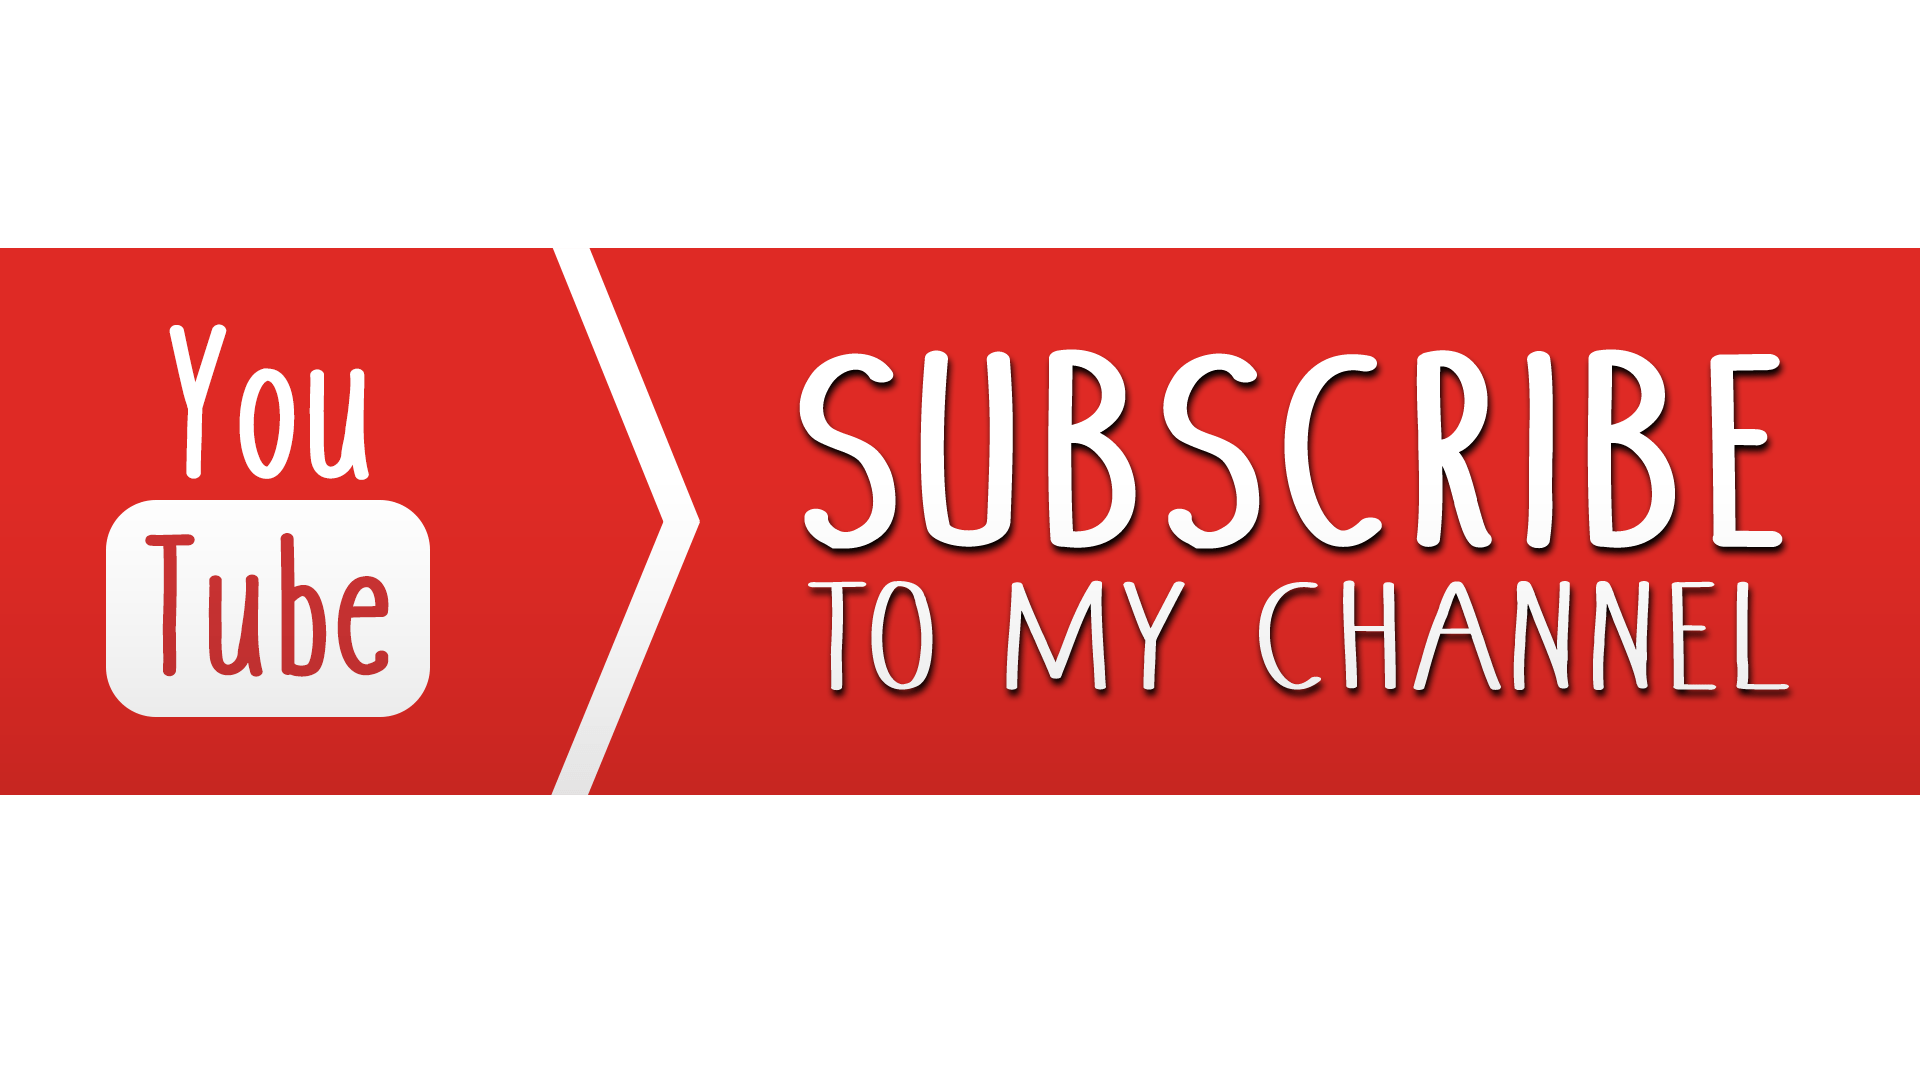 2048 X 1152 Pictures Subscribe Subscribe Button With Icon Youtube Png